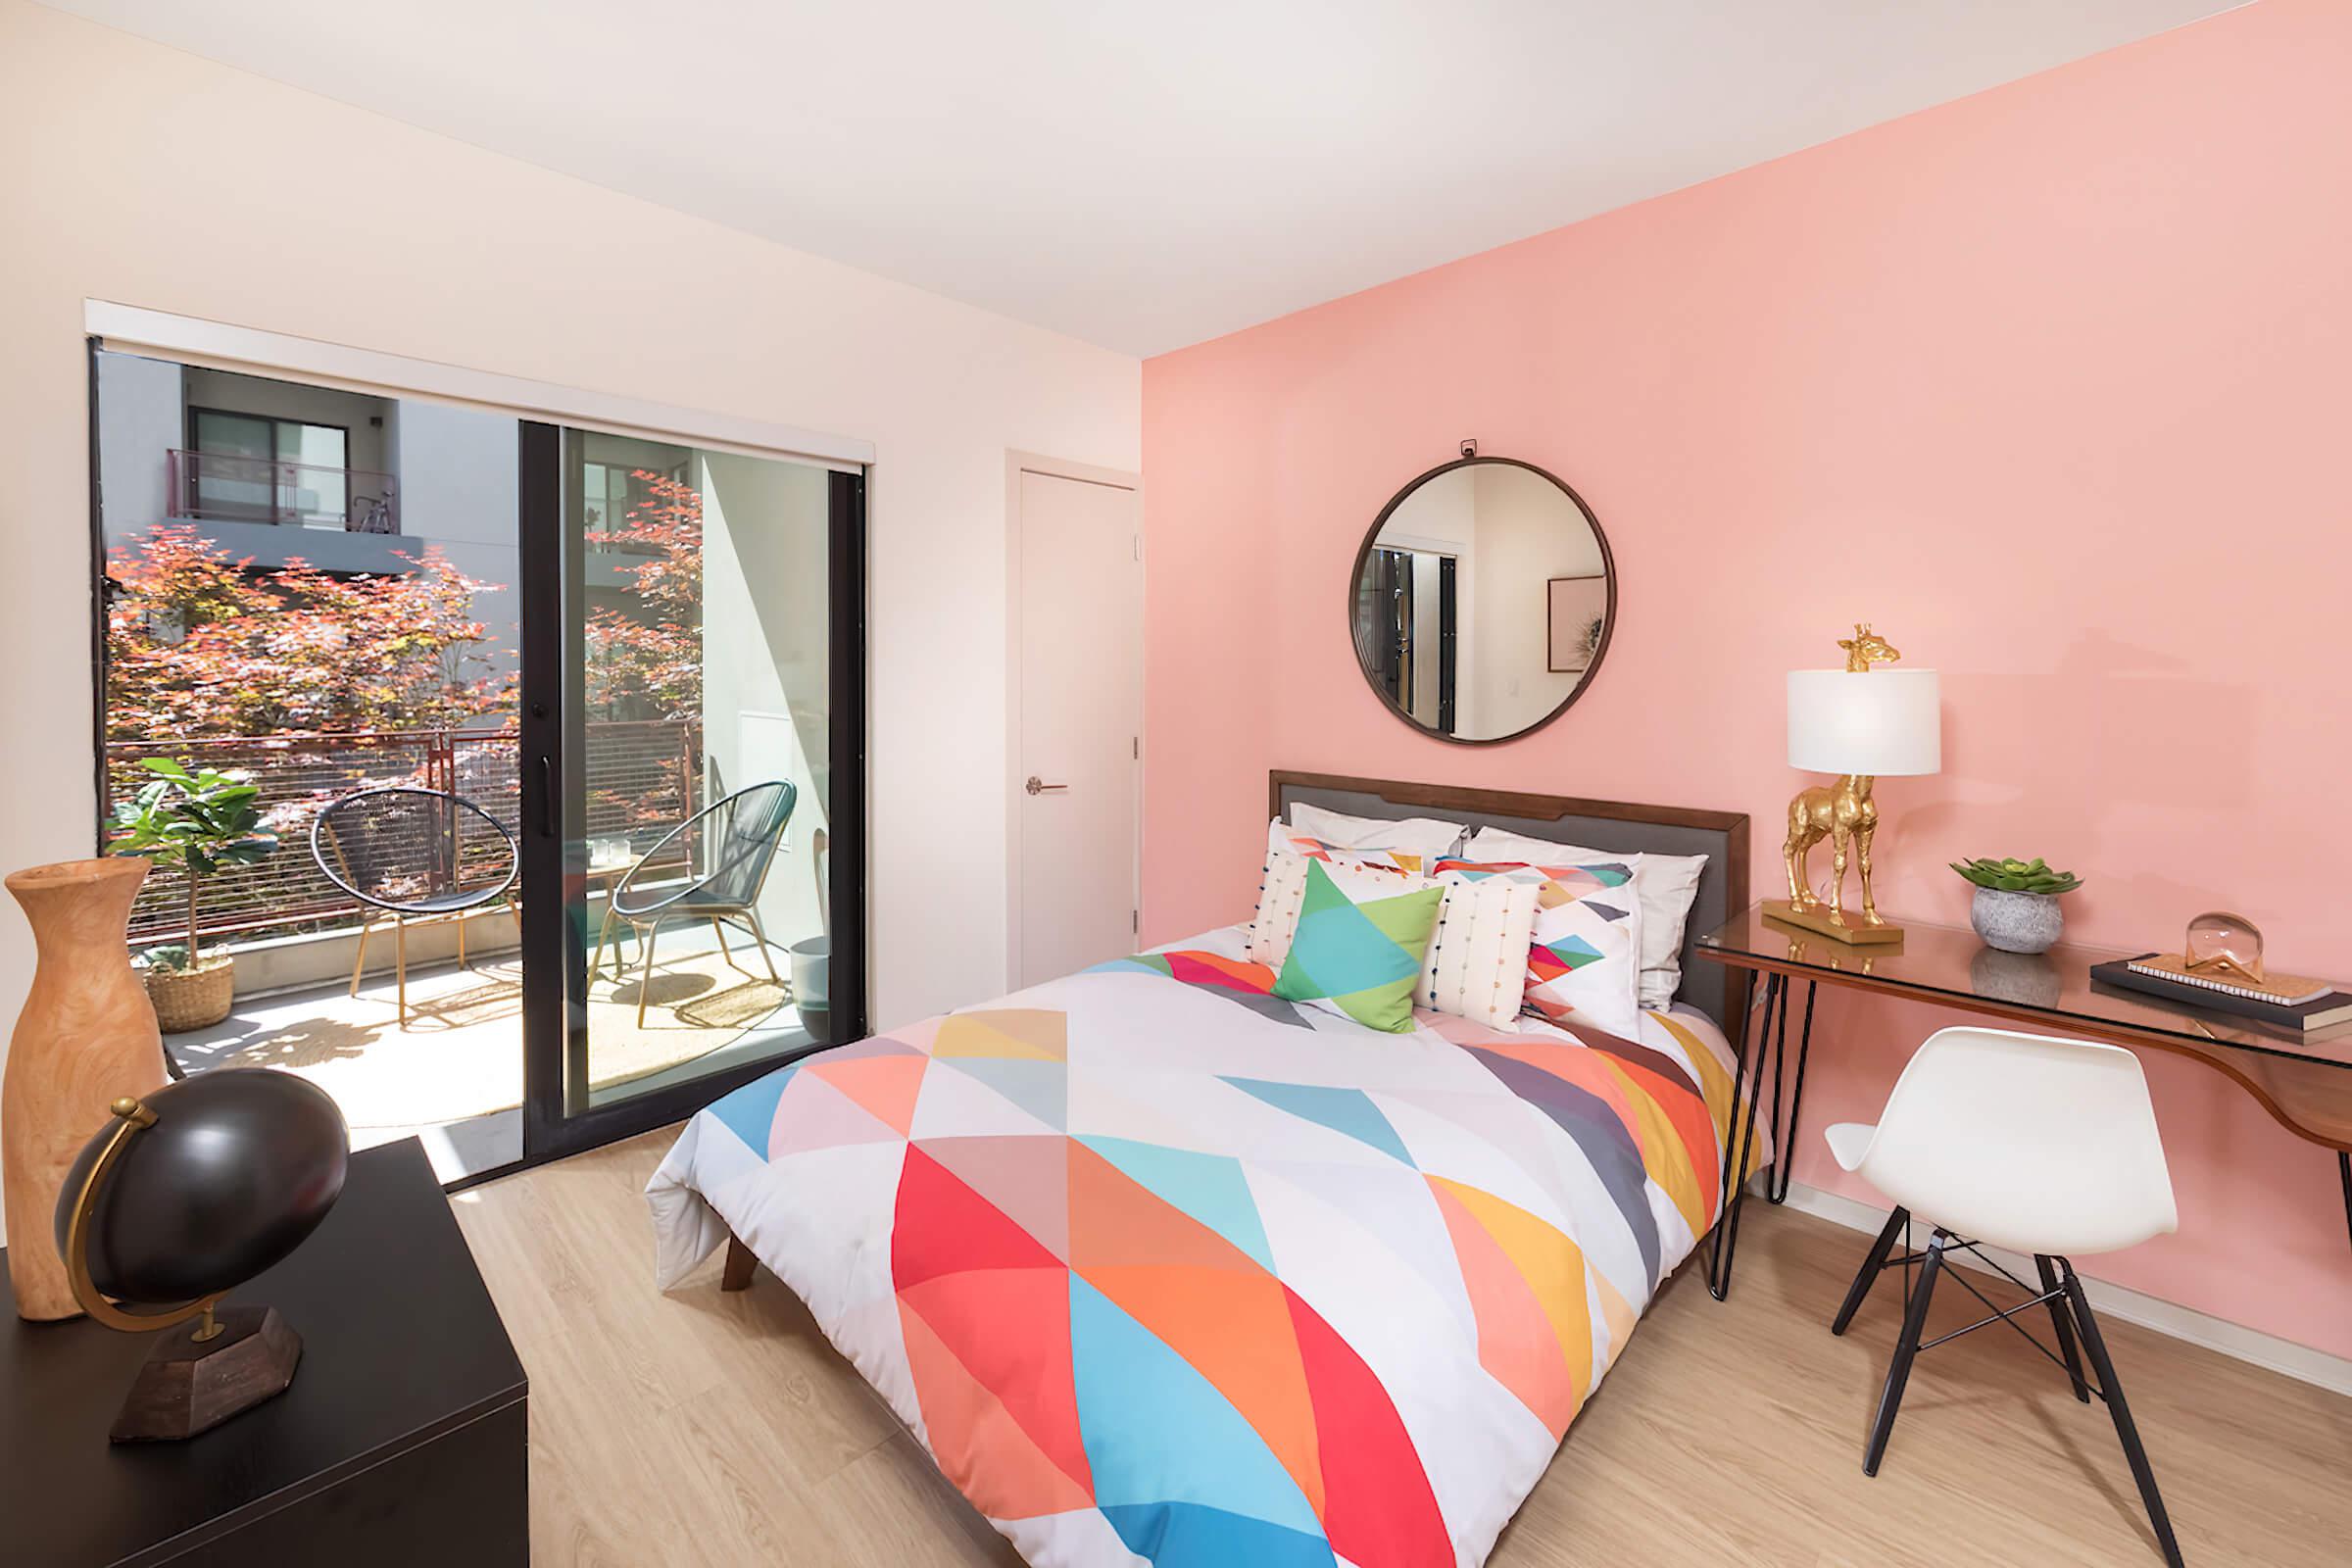 furnished bedroom with a pink accent wall